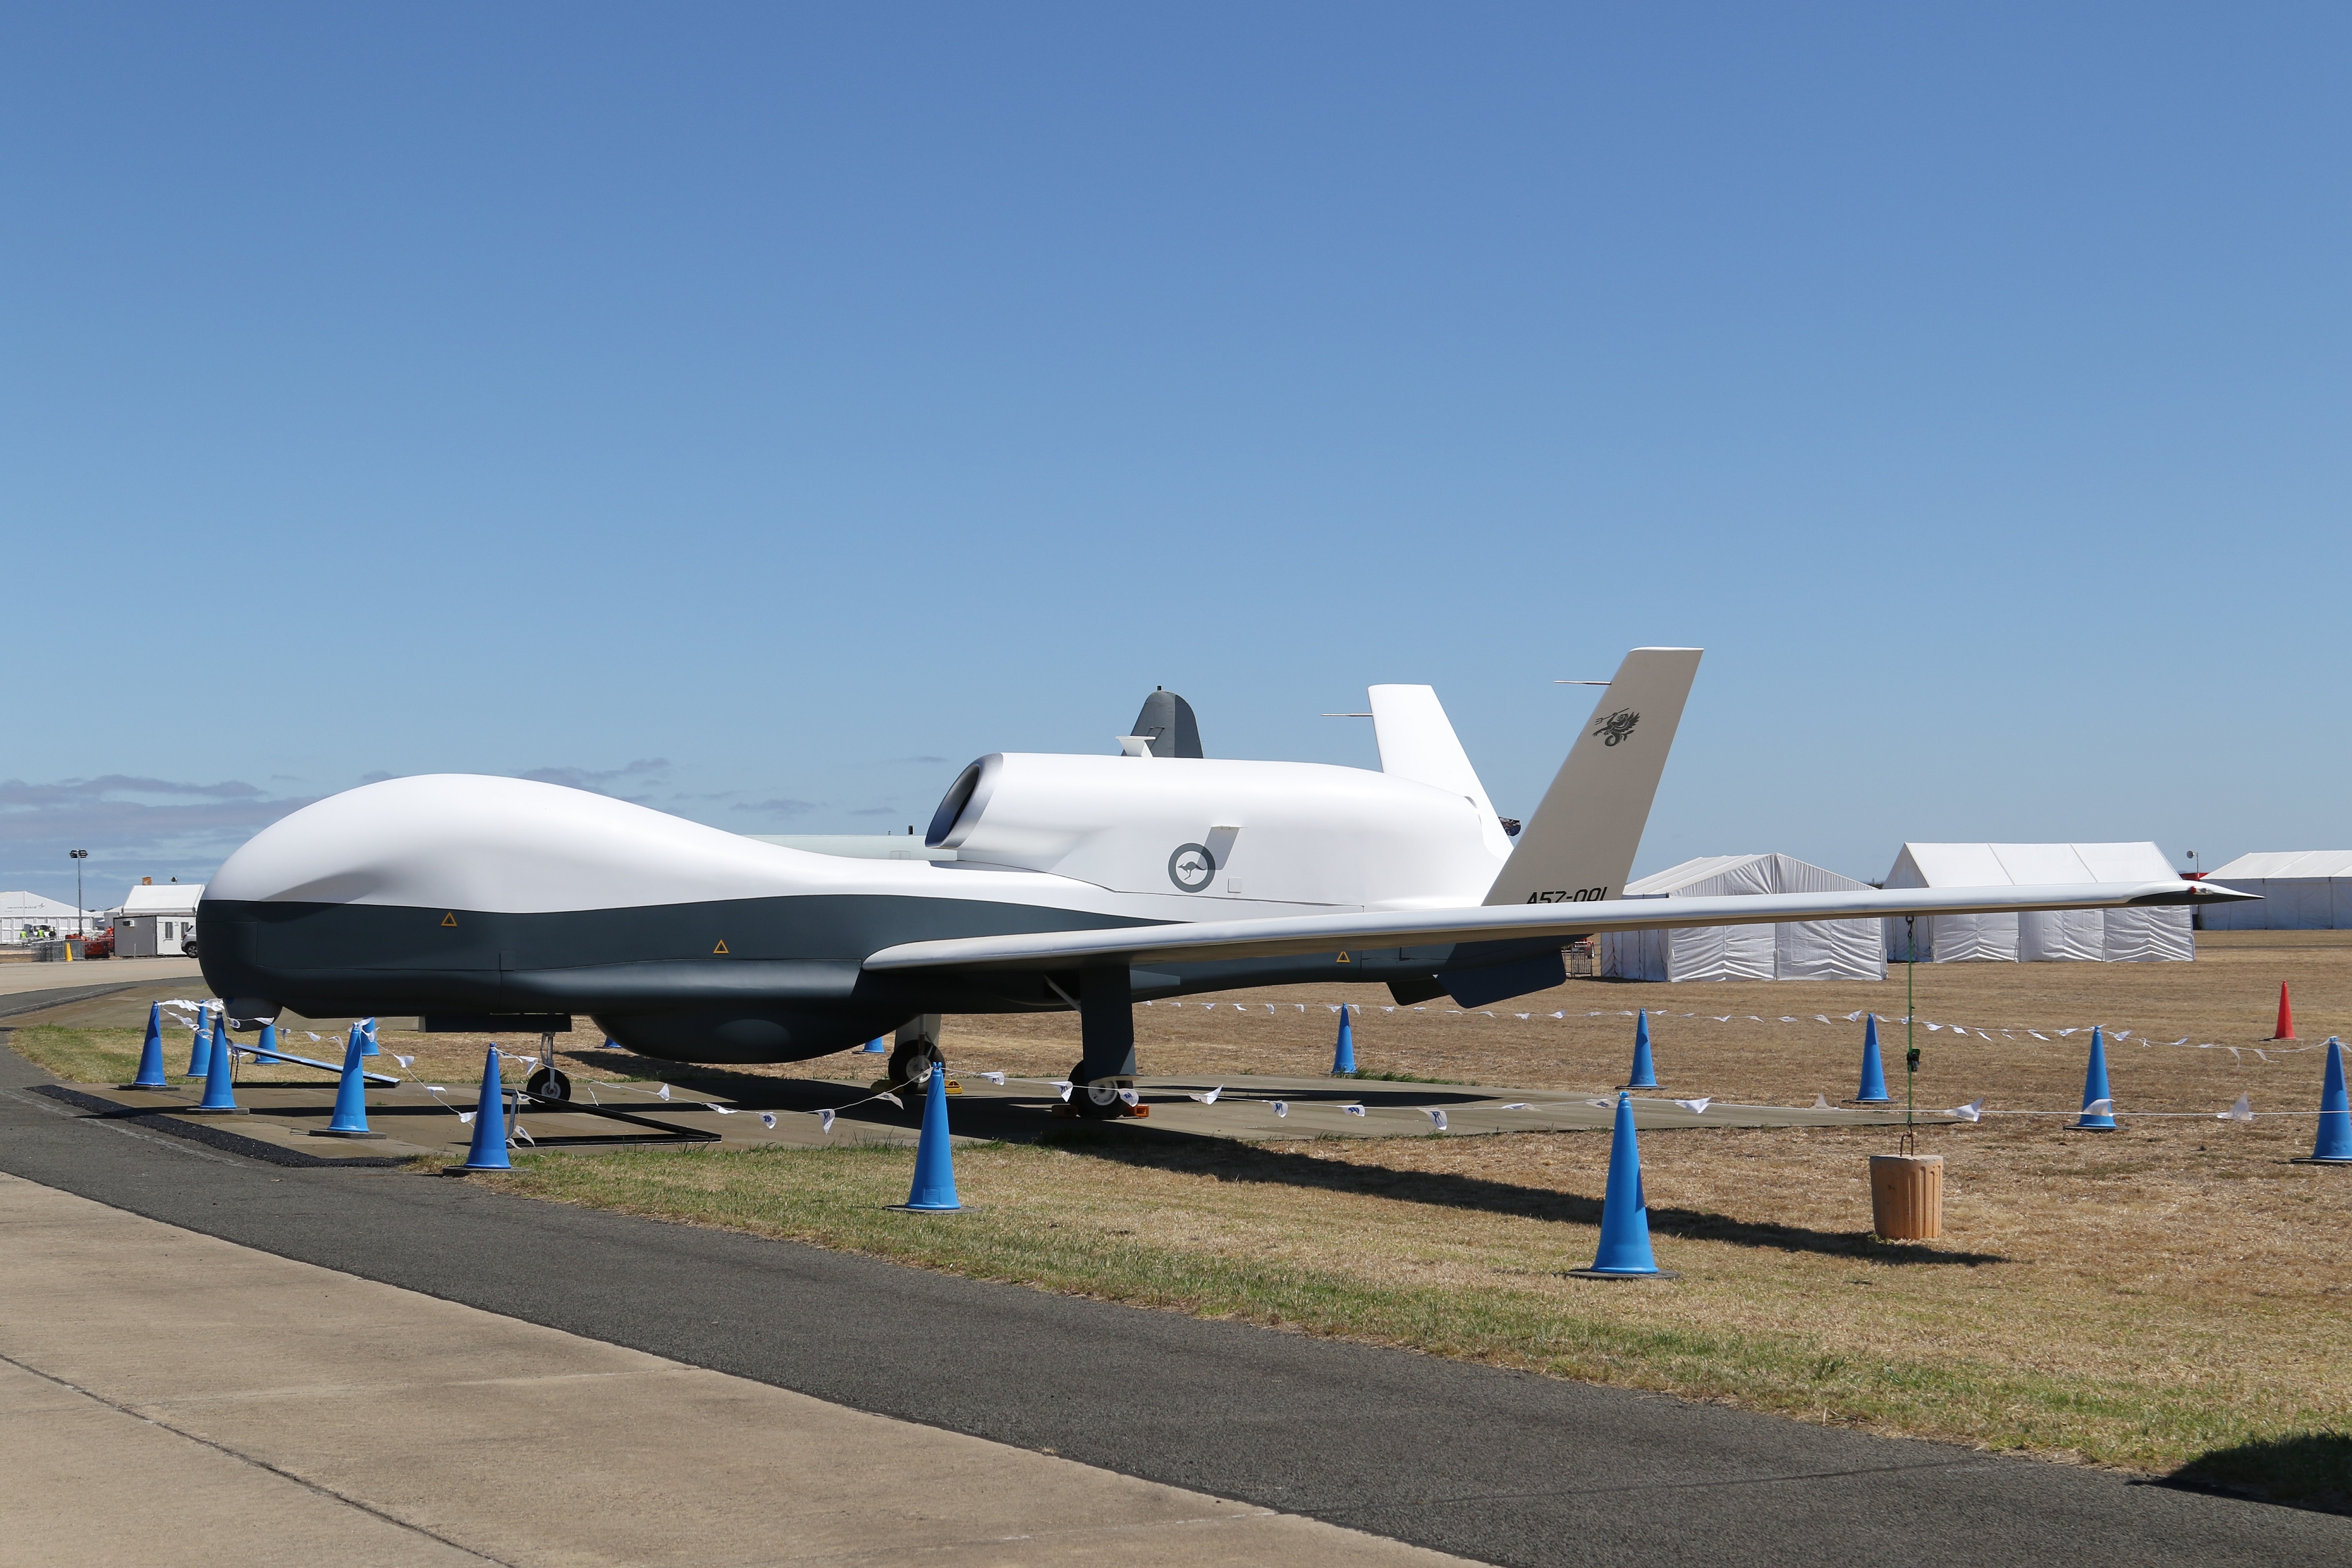 Northrop to Triton to Australia in 2023, says Air Force official